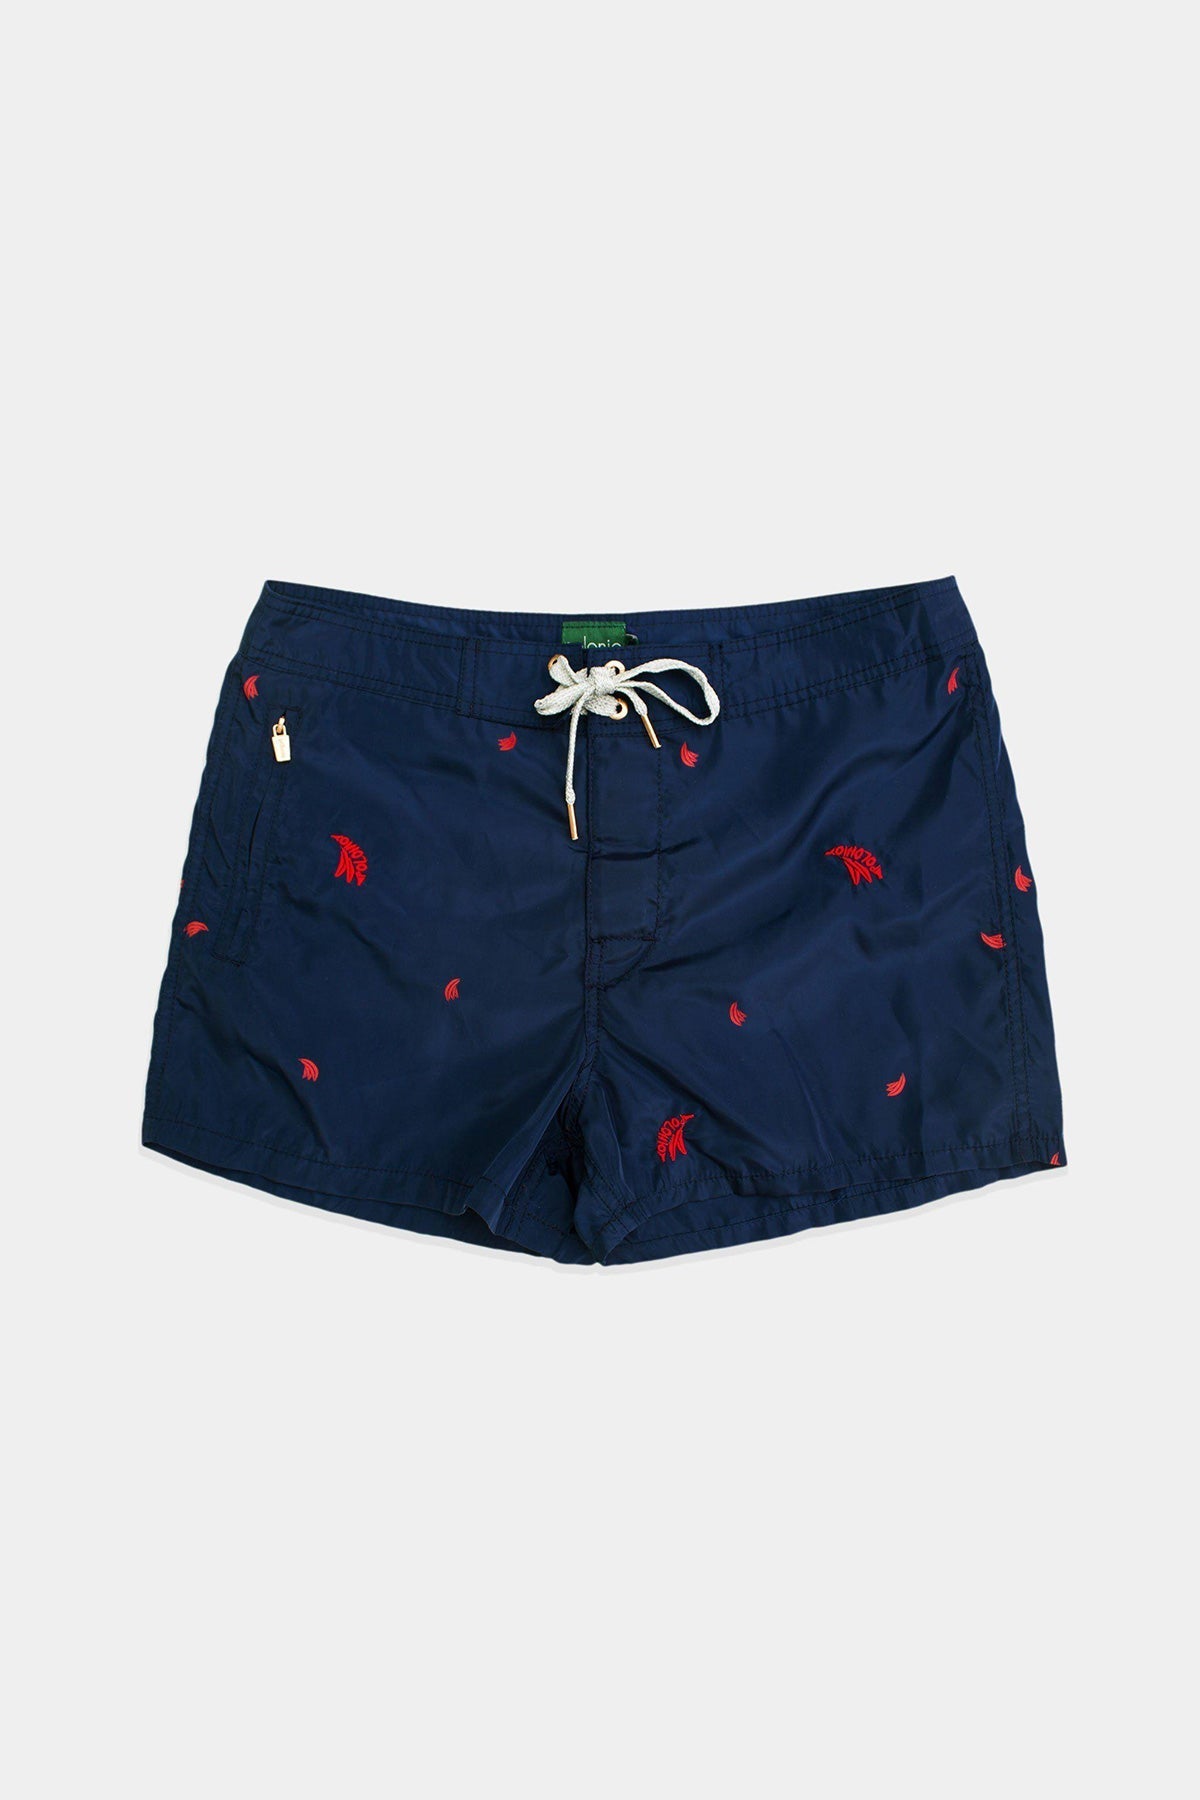 Navy Embroidered Gents Swim Trunks - Polonio